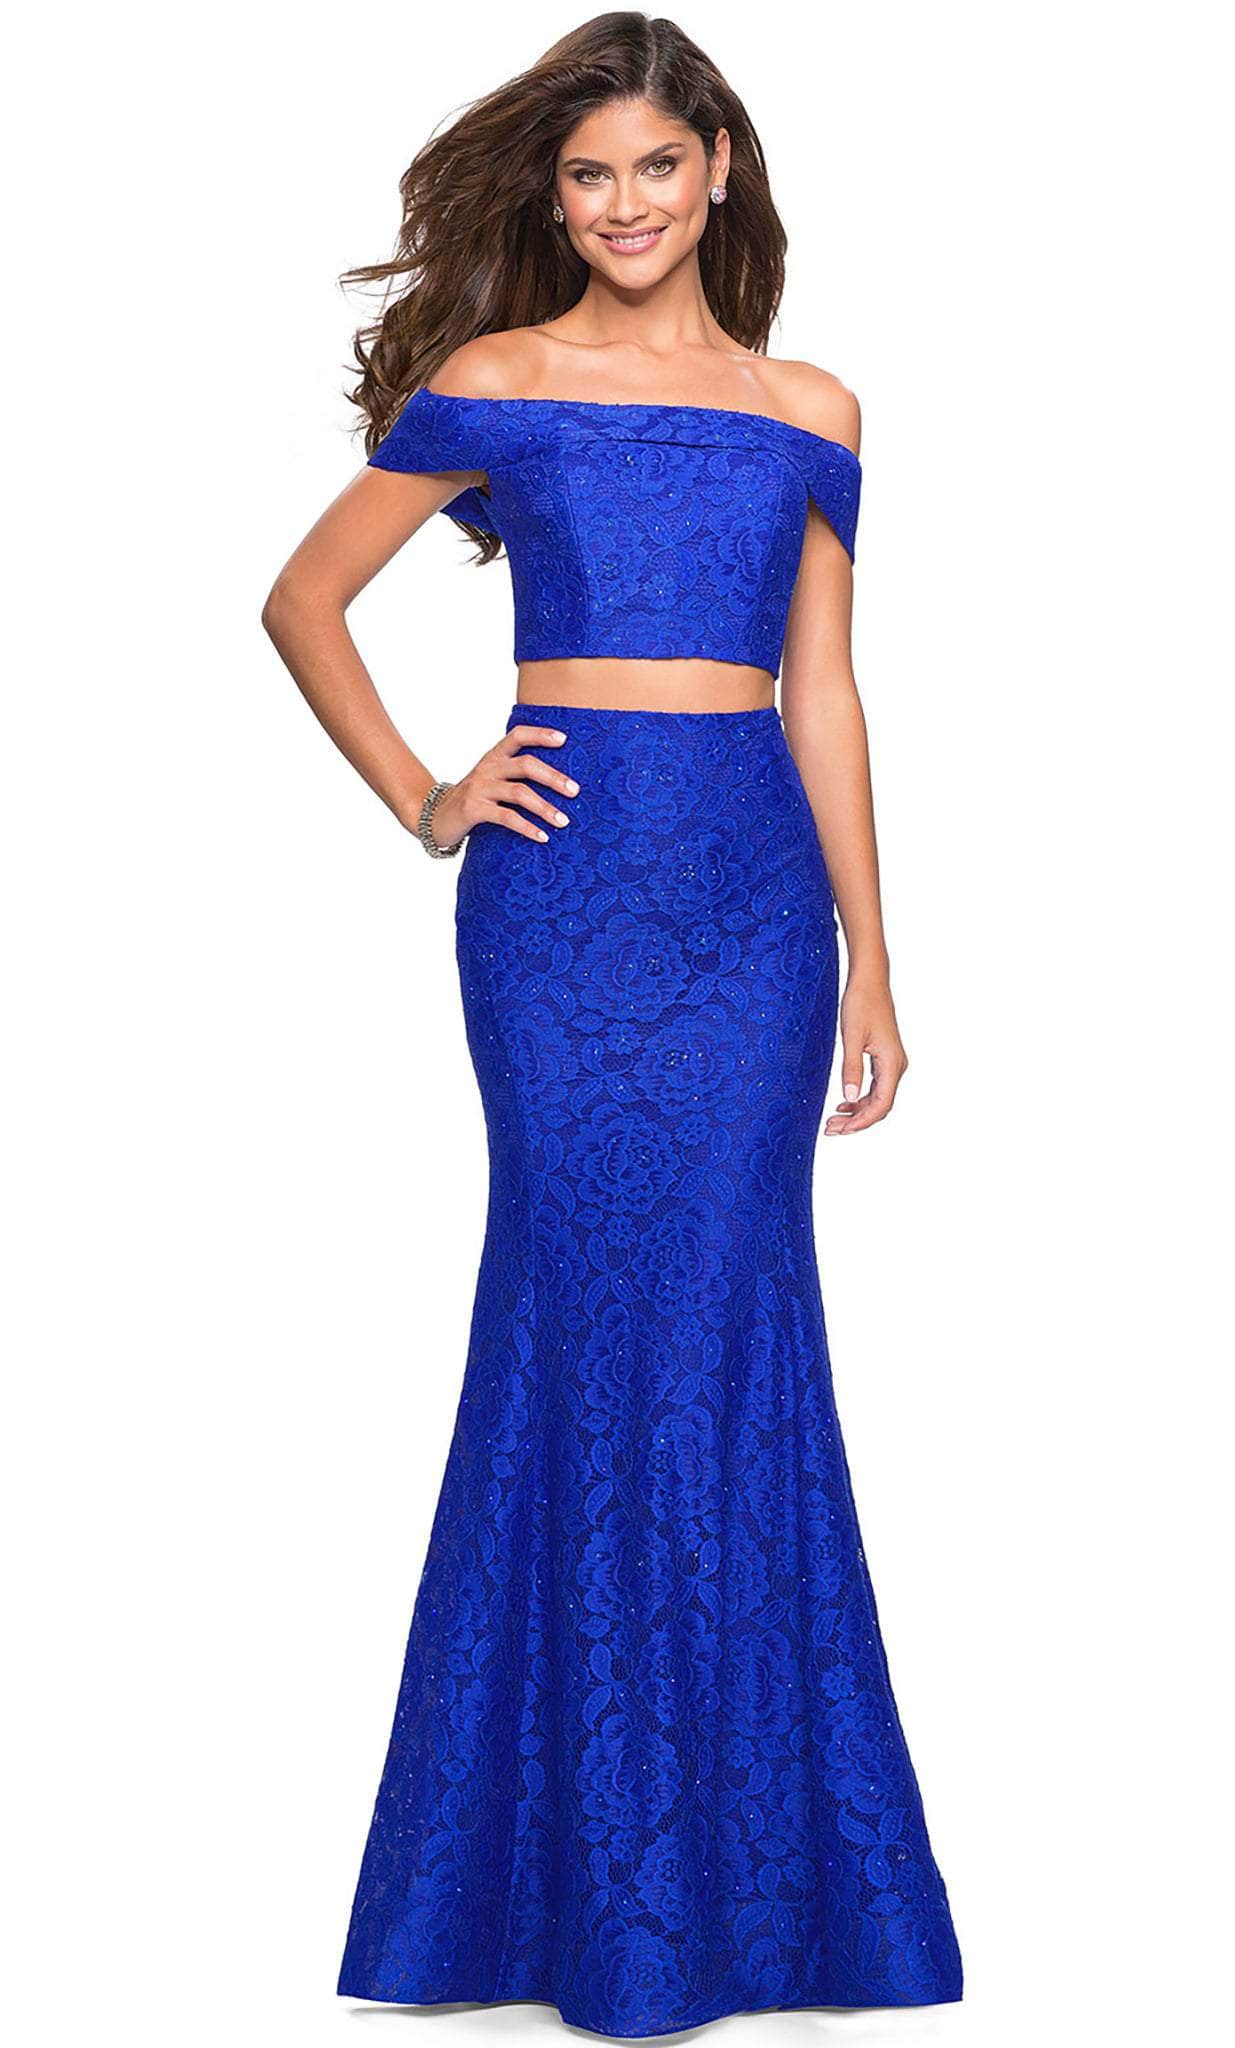 Image of La Femme - 27443 Two-Piece Allover Lace Off Shoulder Mermaid Gown